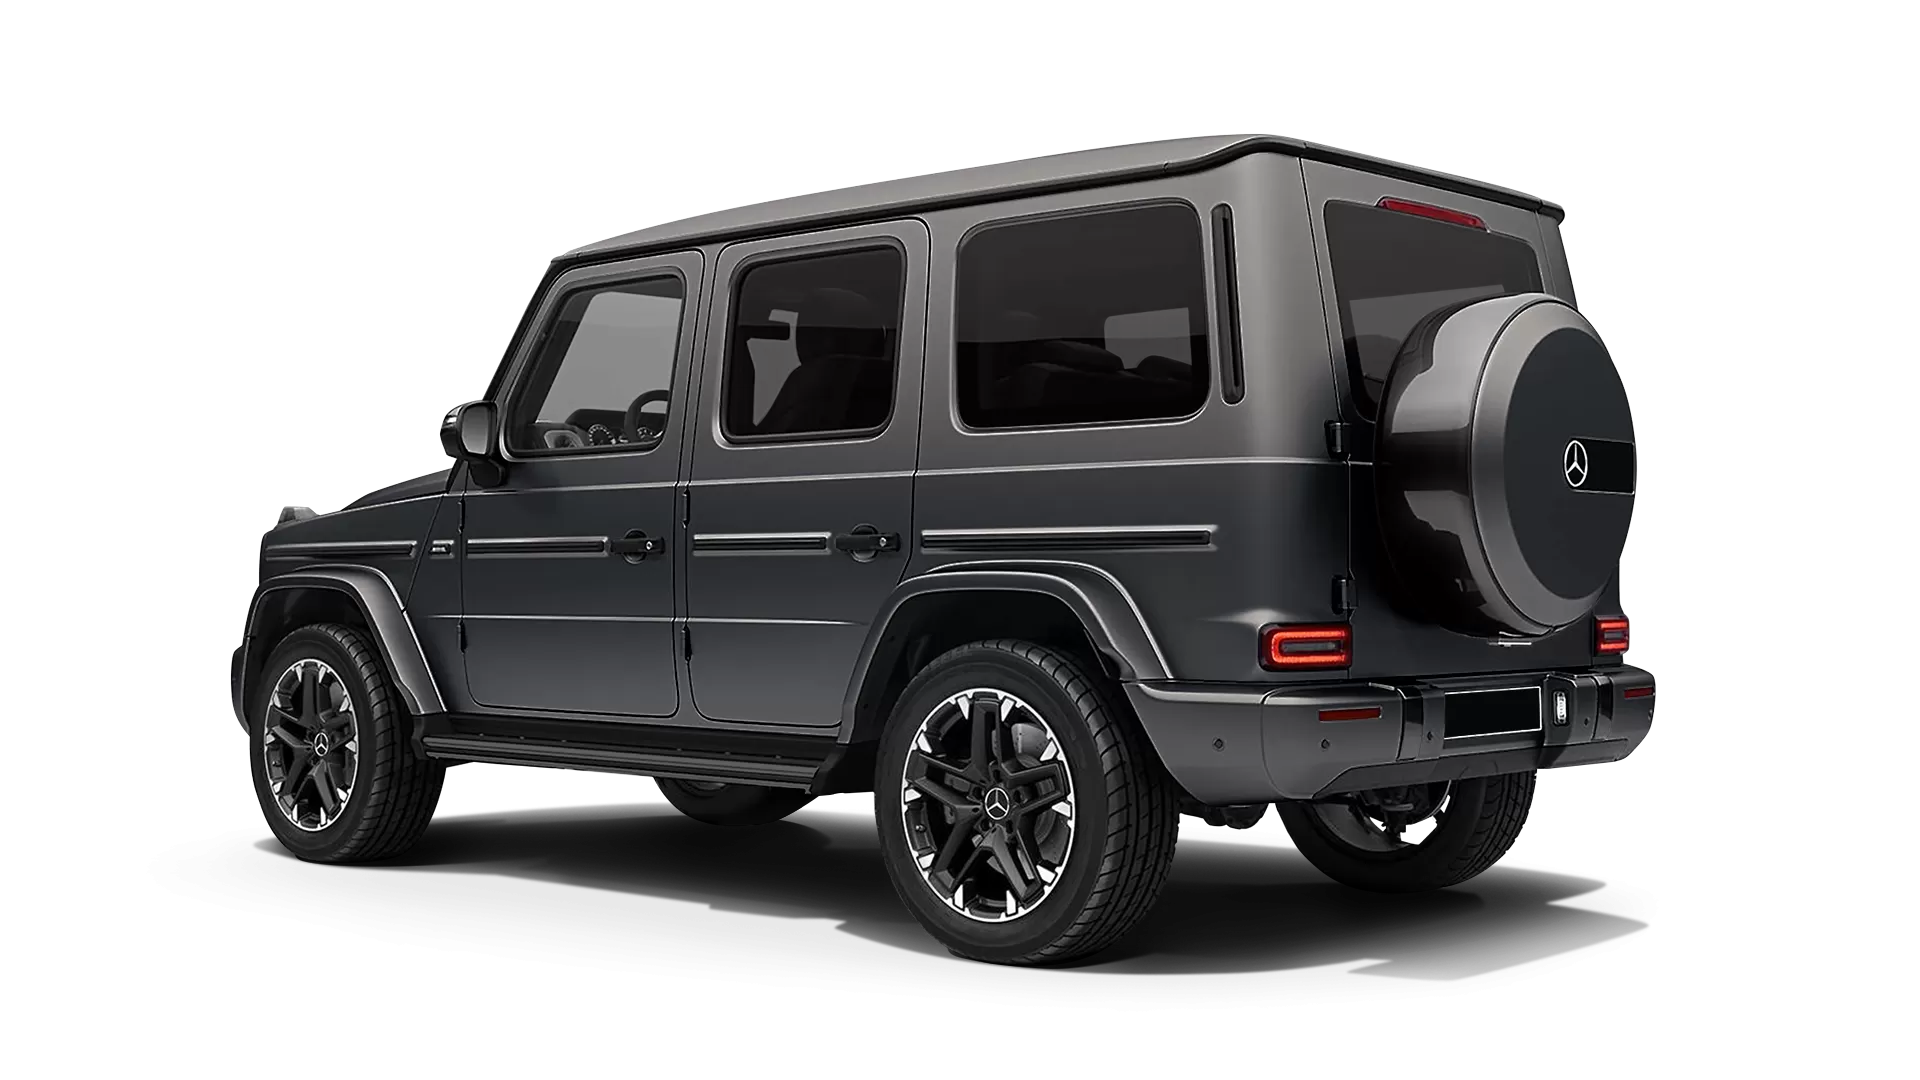 Mercedes G class W463 stock rear view in Monza Grey Magno Latte color